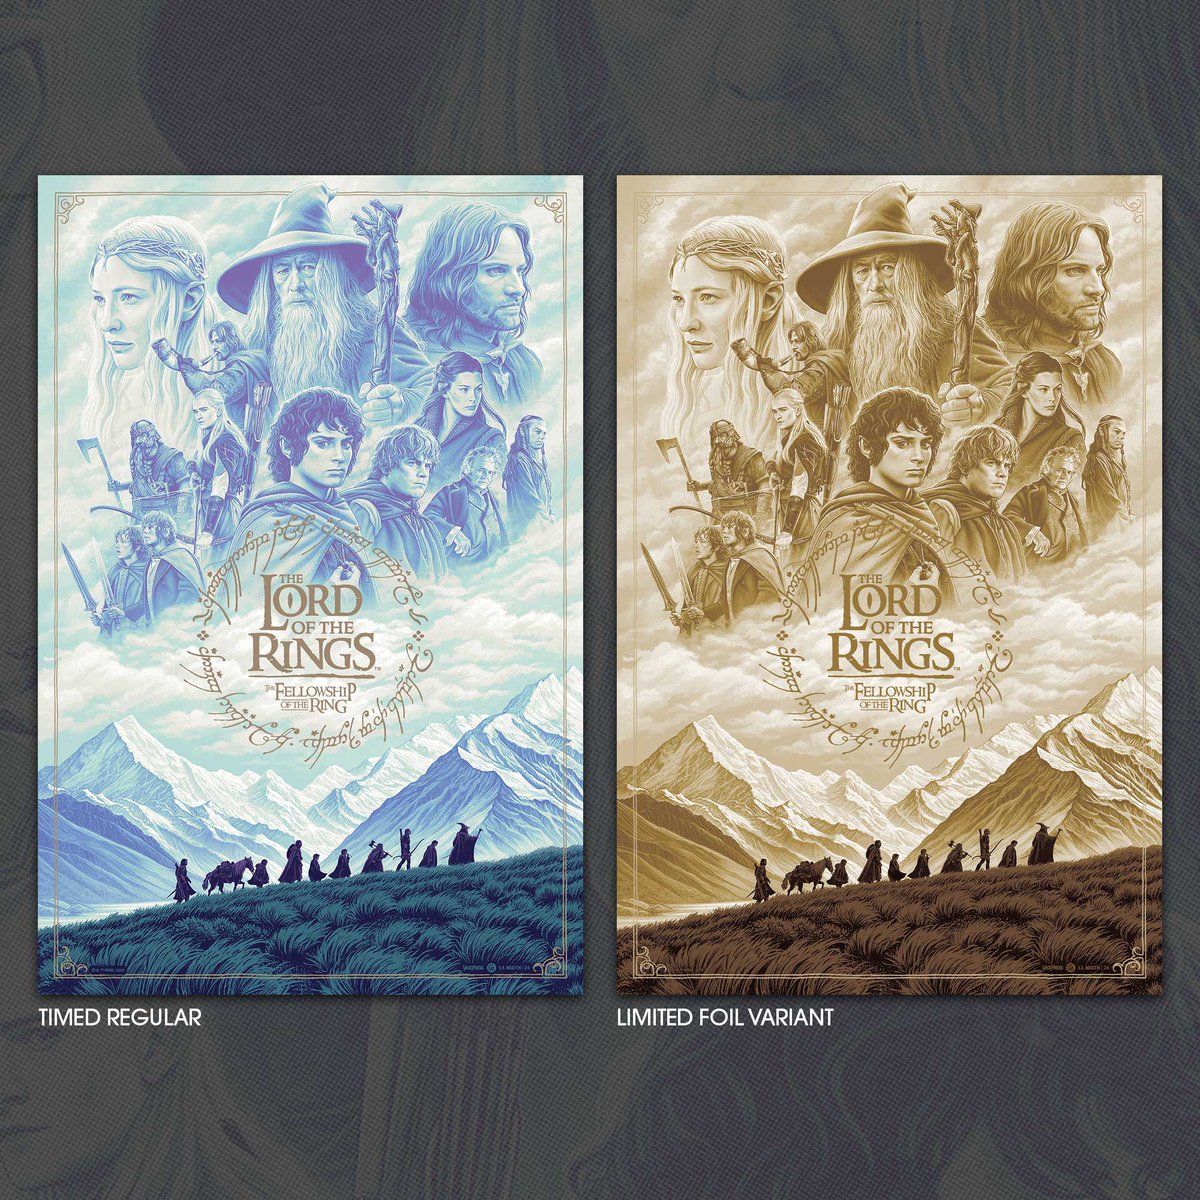 There’s just 20 copies left of @camartinart’s foil variant The Lord Of The Rings: The Fellowship of the Ring left in stock. The timed edition is available until 6pm Wednesday. Vice-Press.com